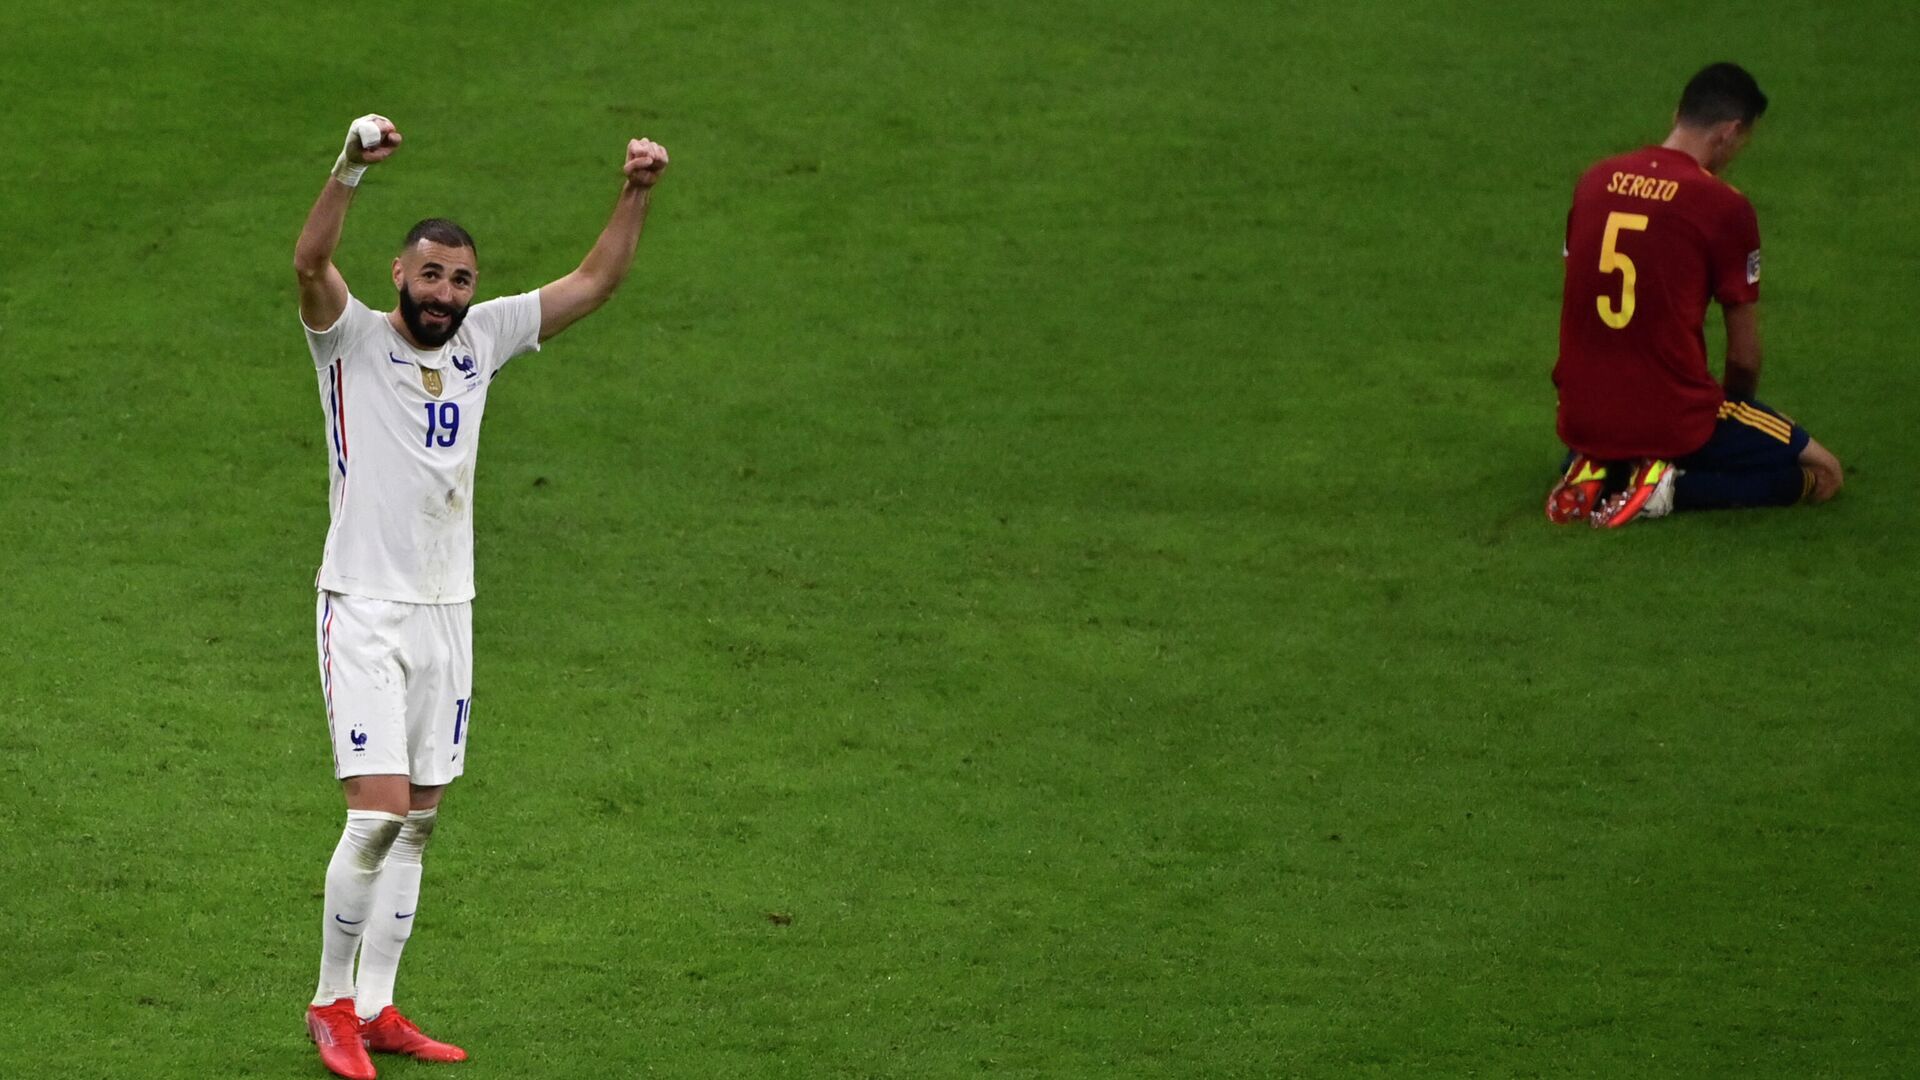 France's forward Karim Benzema (L) celebrates at the end of the Nations League final football match between Spain and France at San Siro stadium in Milan, on October 10, 2021. (Photo by MIGUEL MEDINA / POOL / AFP) - РИА Новости, 1920, 11.10.2021